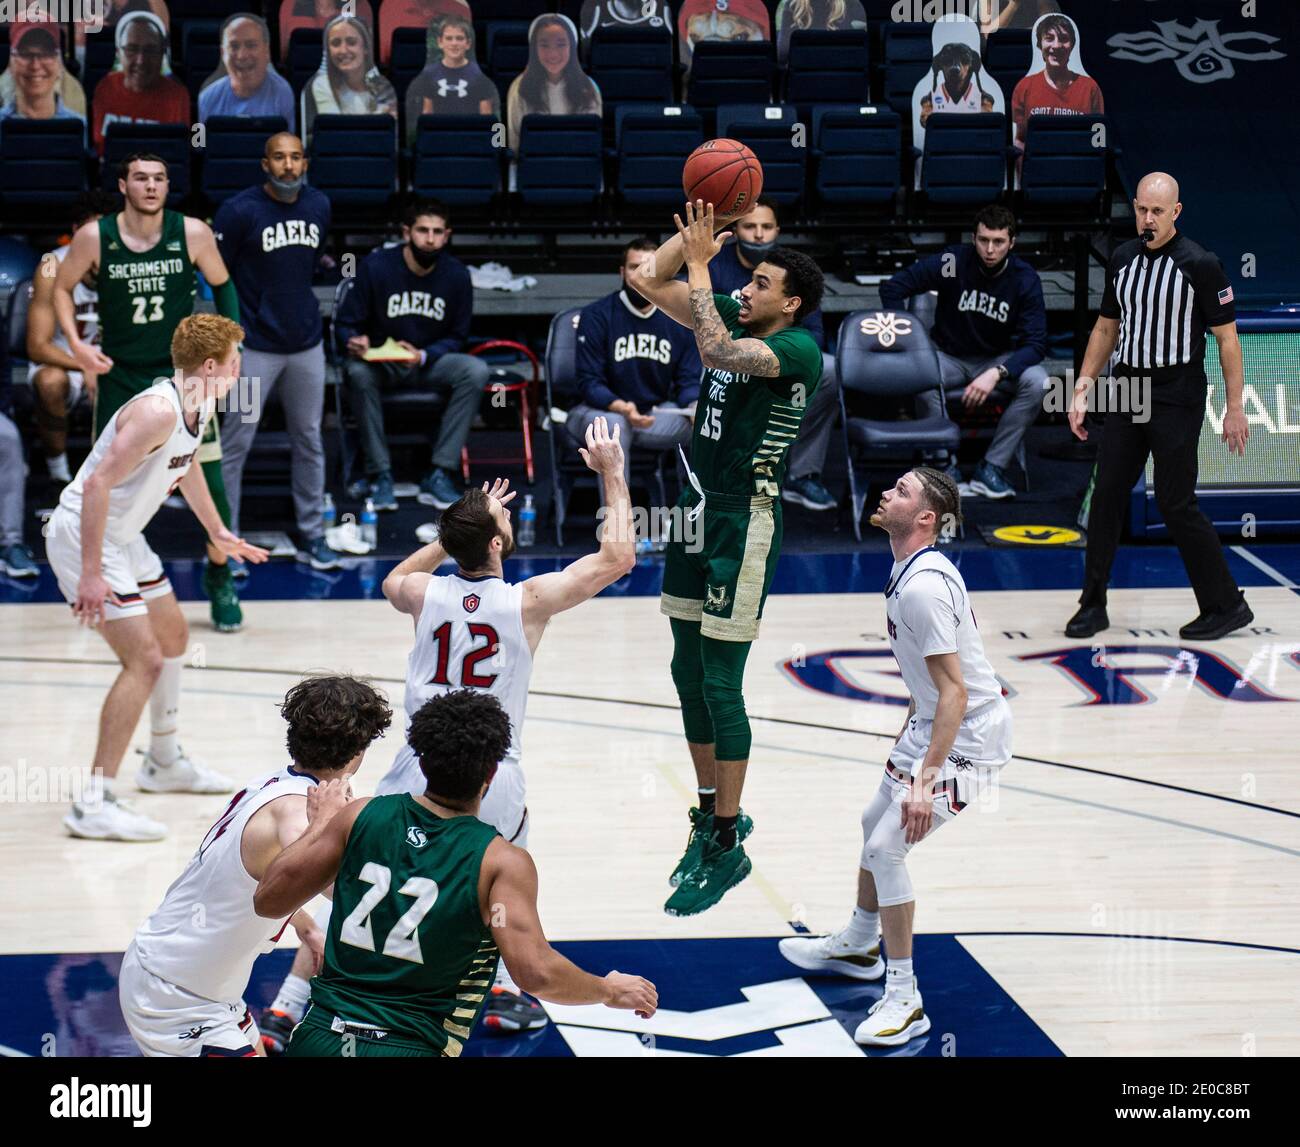 Moraga, CA U.S. 30th Dec, 2020. A. Sacramento State Hornets guard Christian Terrell (35) takes a shot during the NCAA Men's Basketball game between Sacramento State Hornets and the Saint Mary's Gaels 45-63 lost at McKeon Pavilion Moraga Calif. Thurman James/CSM/Alamy Live News Stock Photo